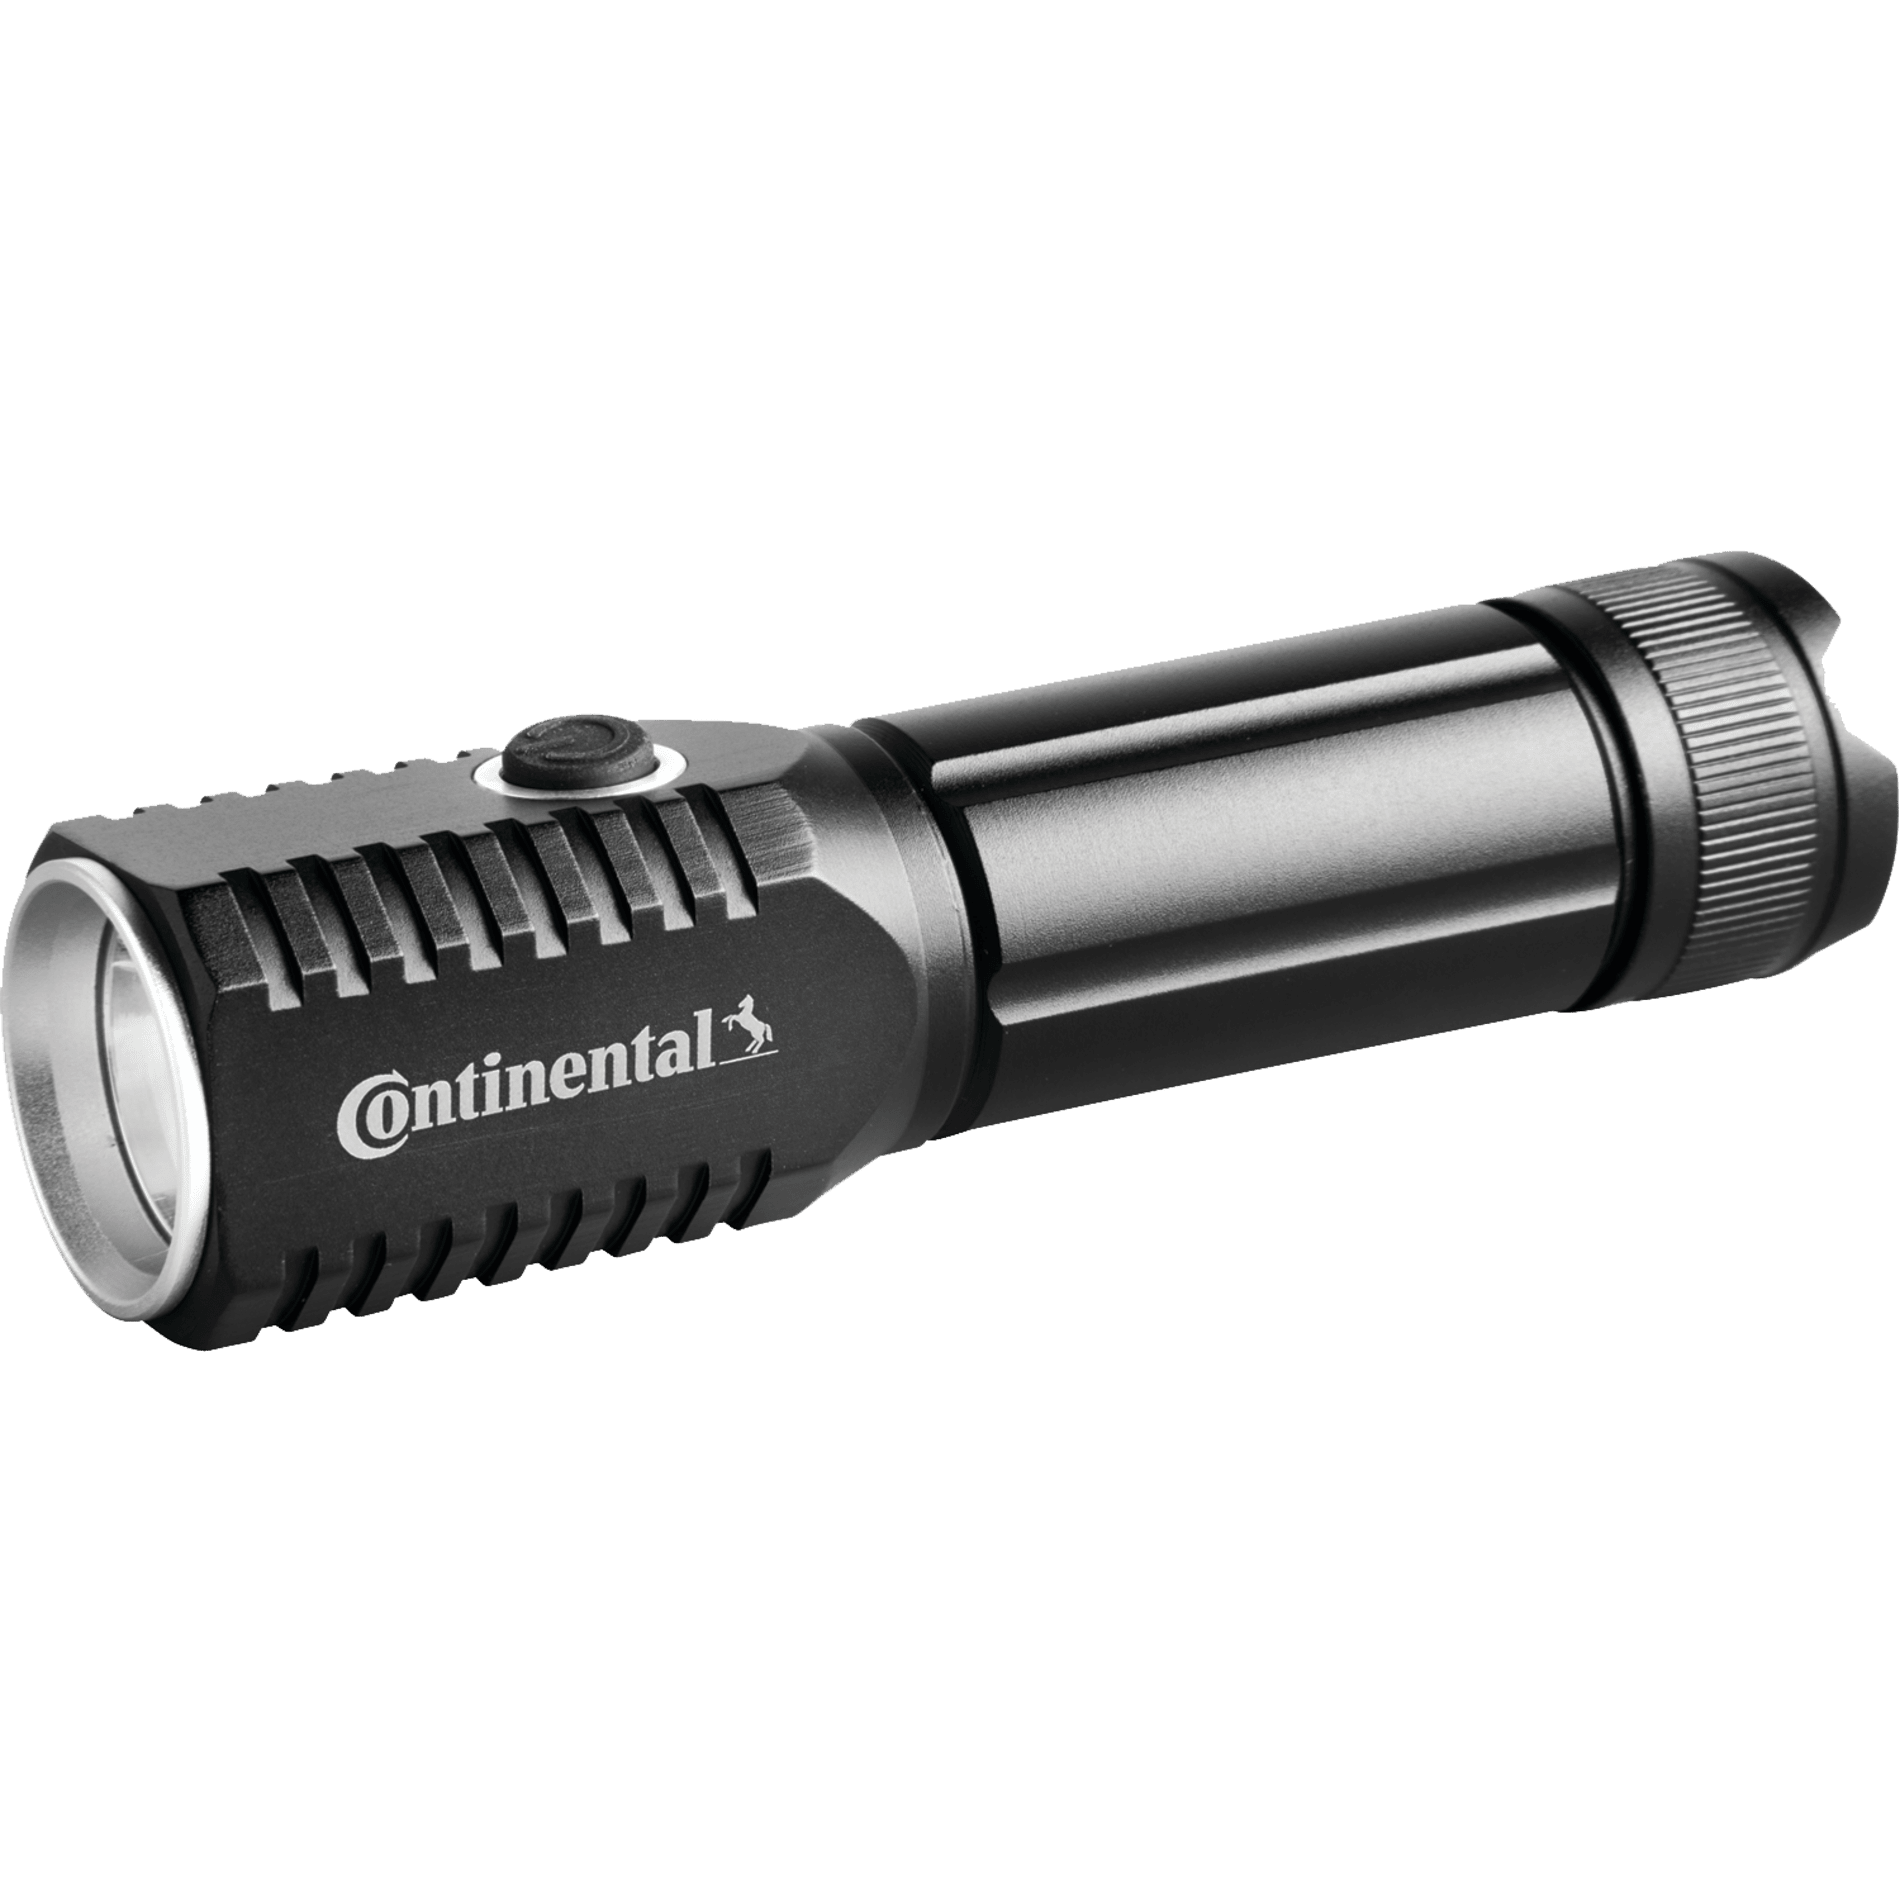 Great for on the job site or the weekend warrior, this double 3W CREE XPE high power aluminum flashlight with extra strength magnet is designed to stick to metal work surfaces. Push button on/off. 120 Lumens. 24hr Continuous lighting period. 3 AAA batteries included.